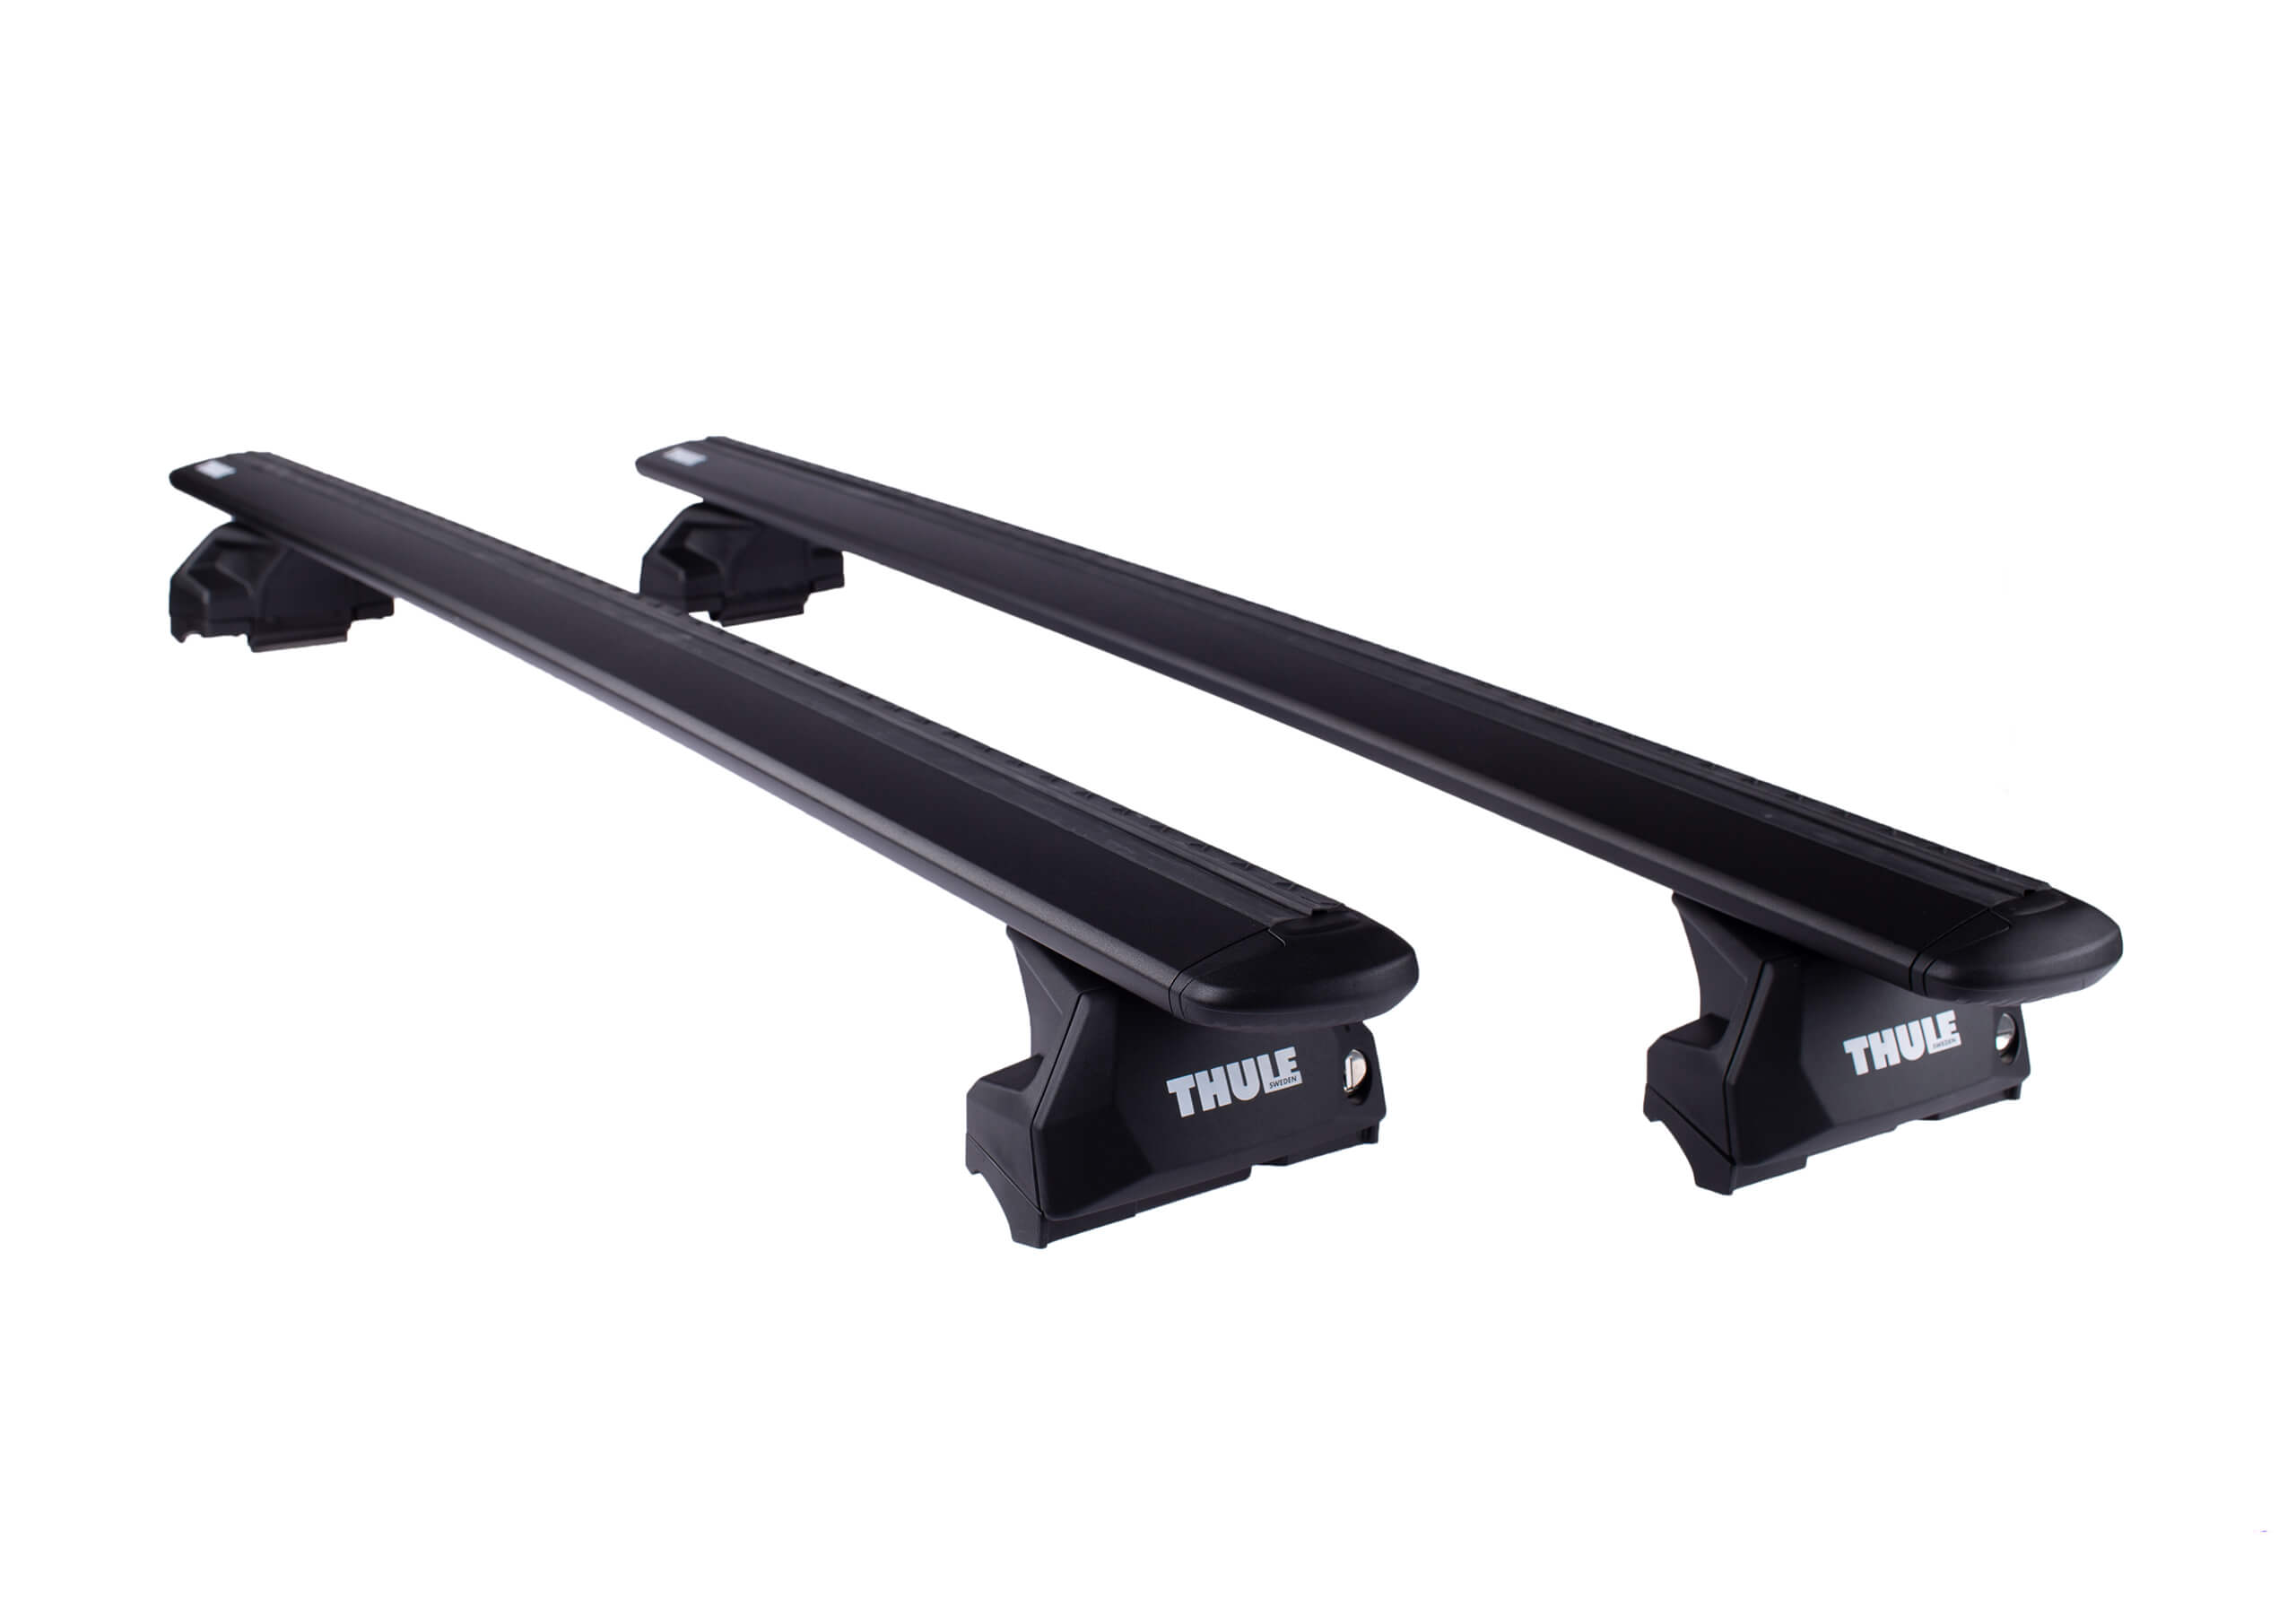 Ford Focus estate (2011 to 2018):Thule black WingBars package - 7106, 7112B, 6022